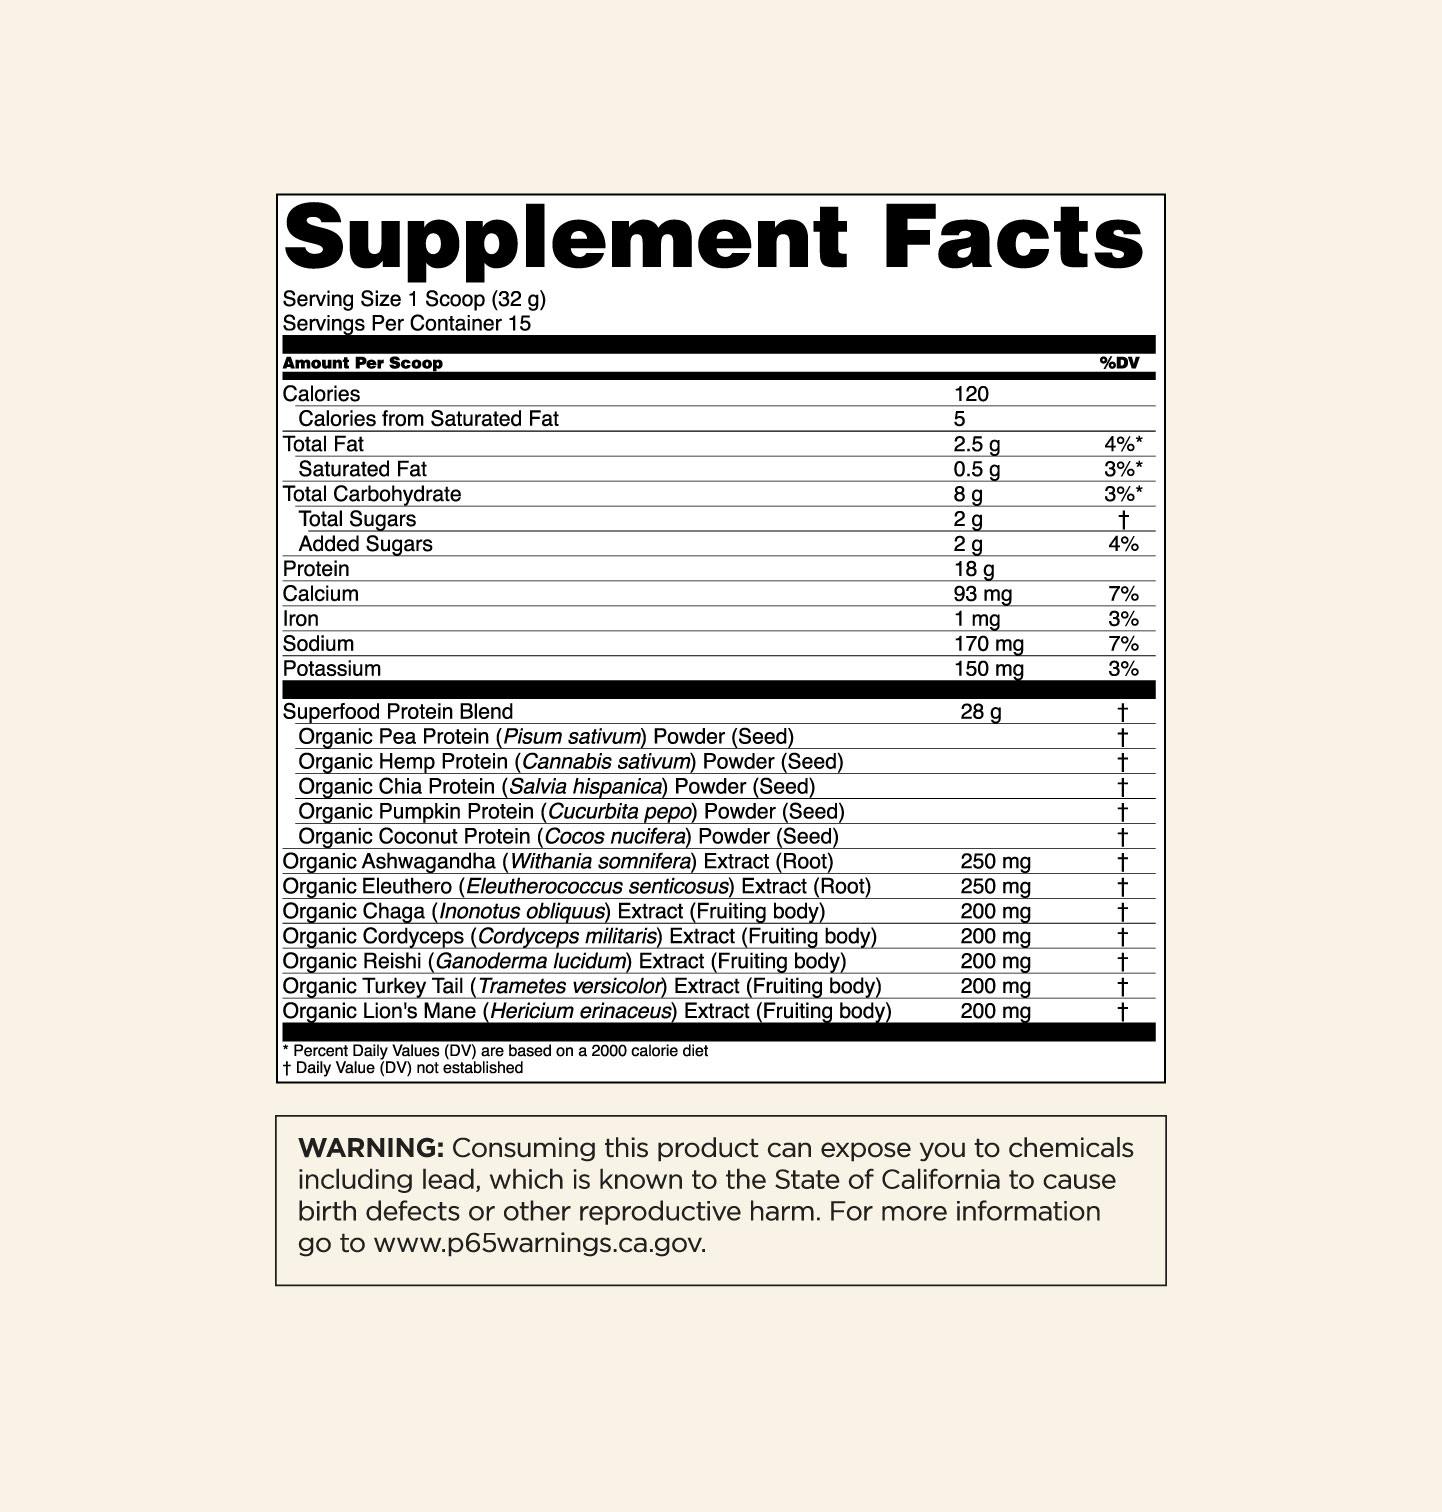 Supplements Facts Panel